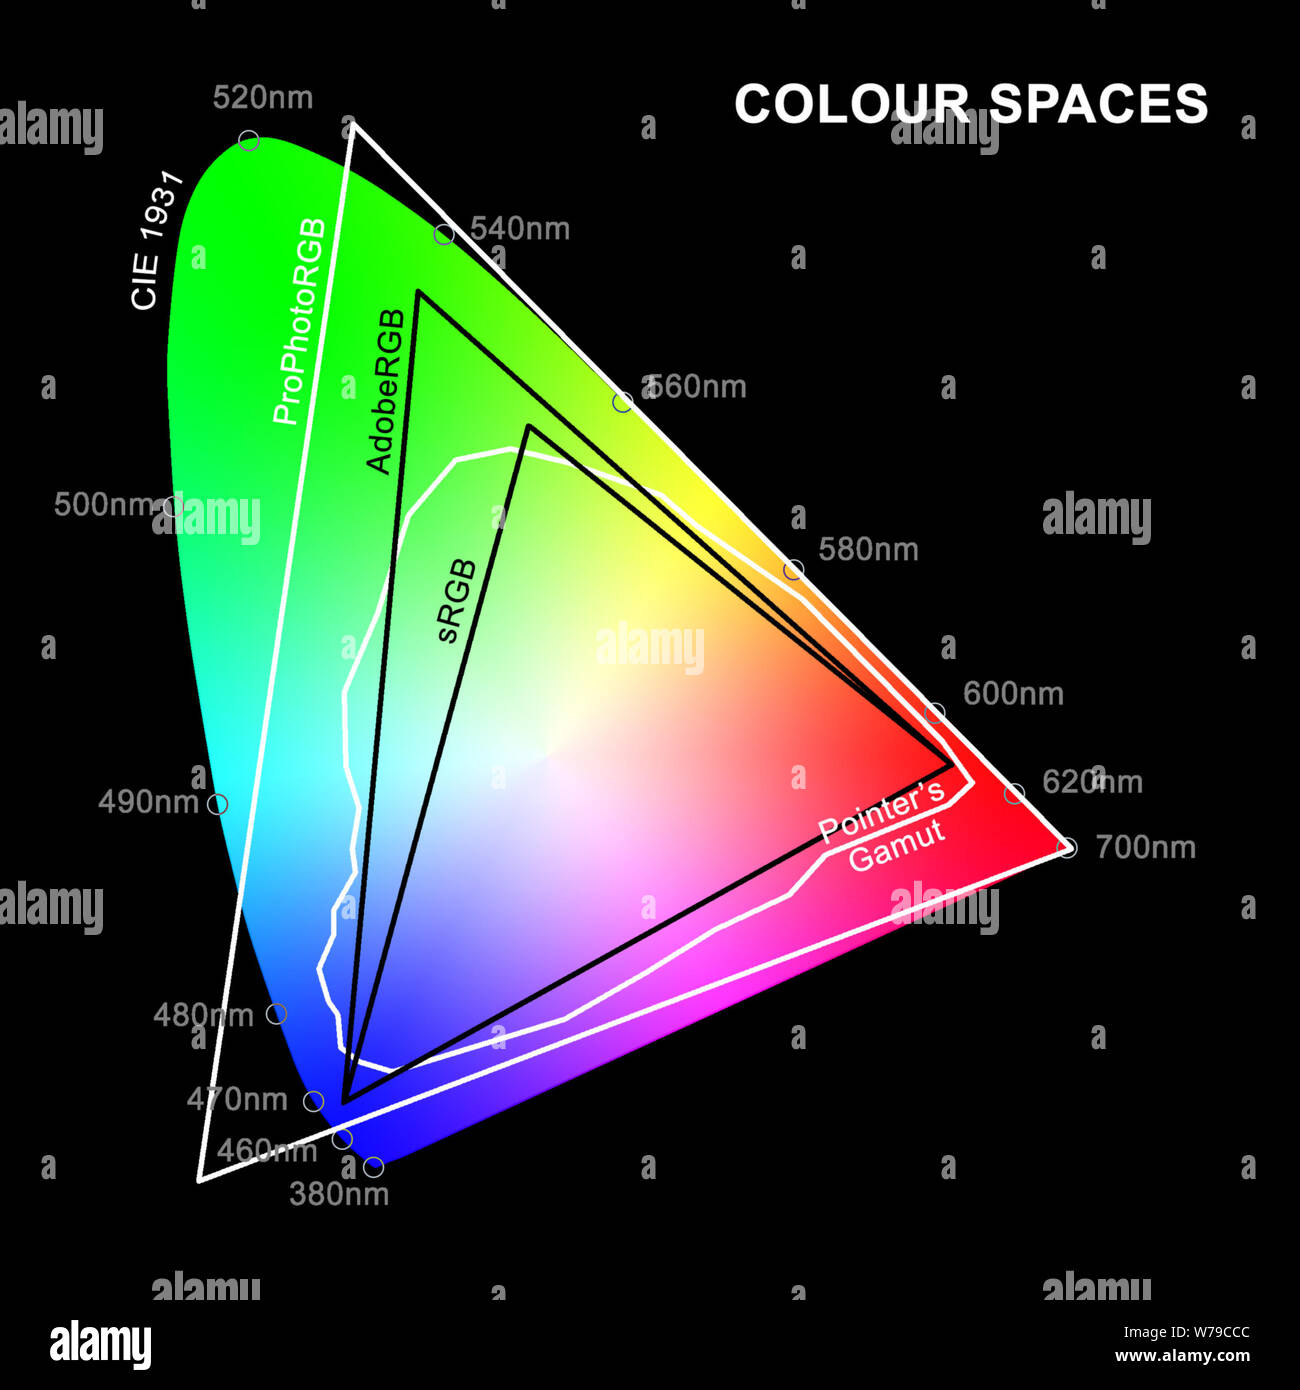 An illustration of sRGB, AdobeRGB, ProPhotoRGB and Pointer's Gamut colour spaces overlaid on CIE 1931 Chromaticity Diagram of human colour perception Stock Photo